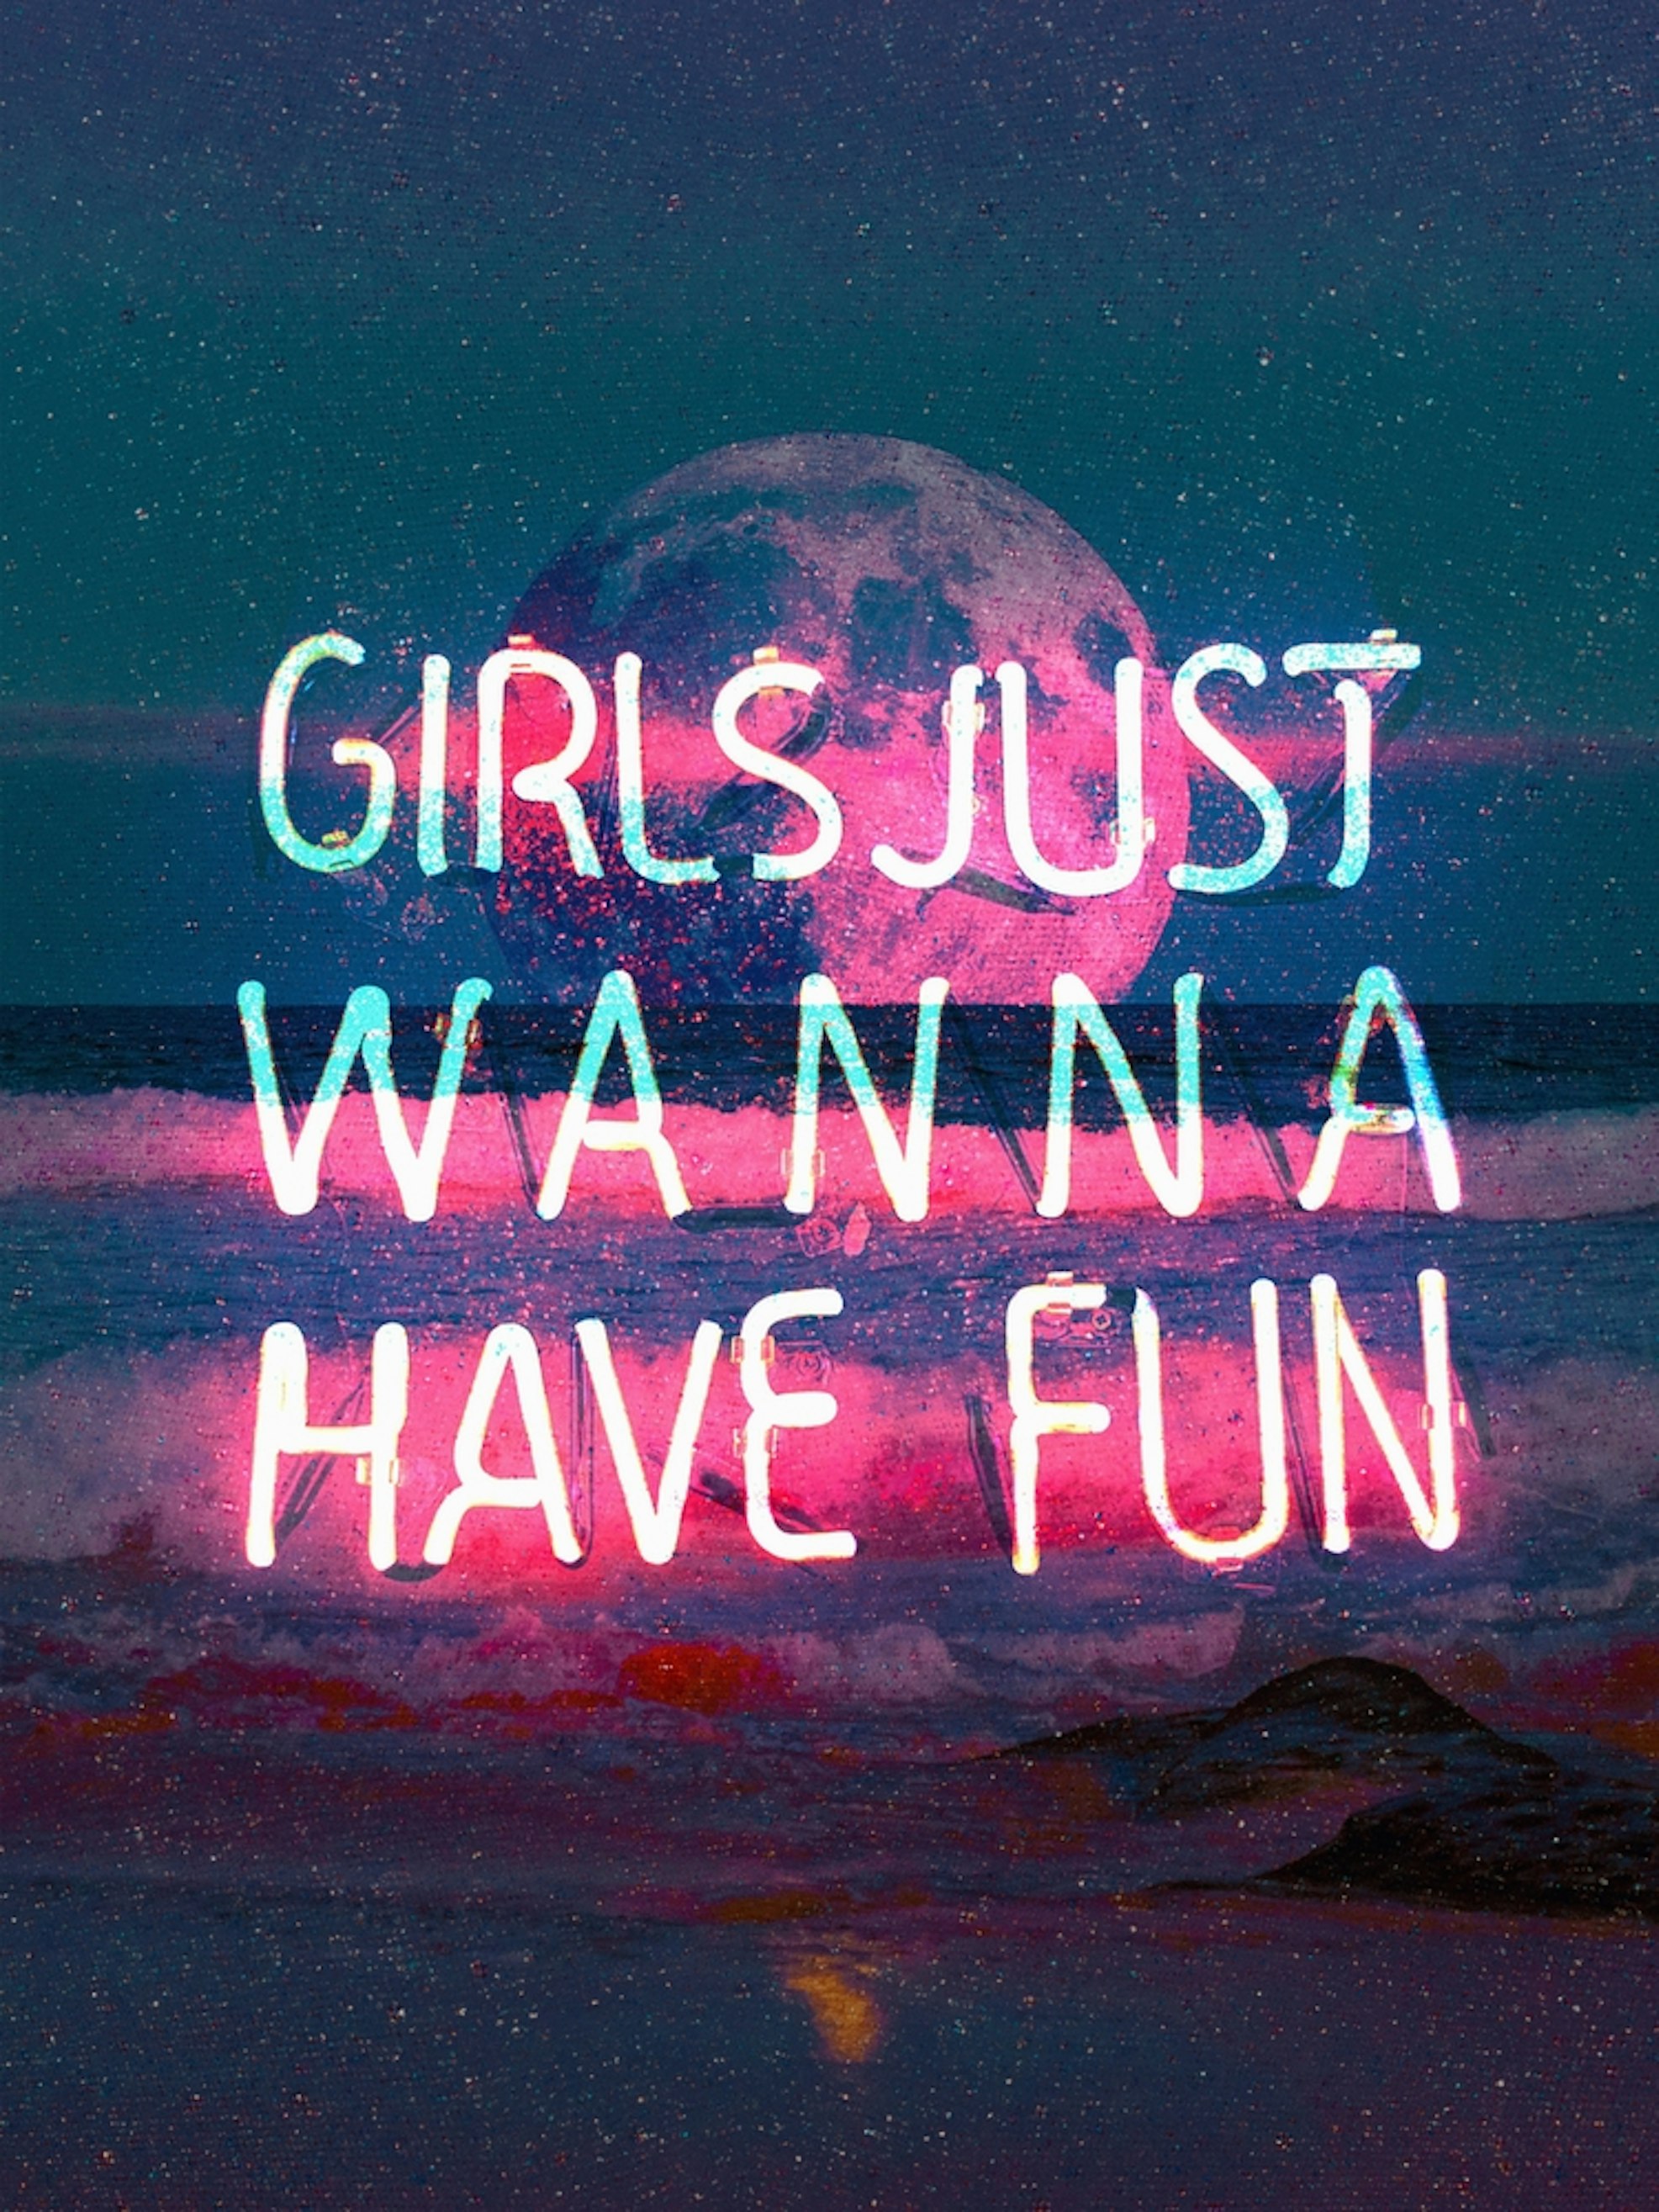 girls just wanna have fun quotes tumblr